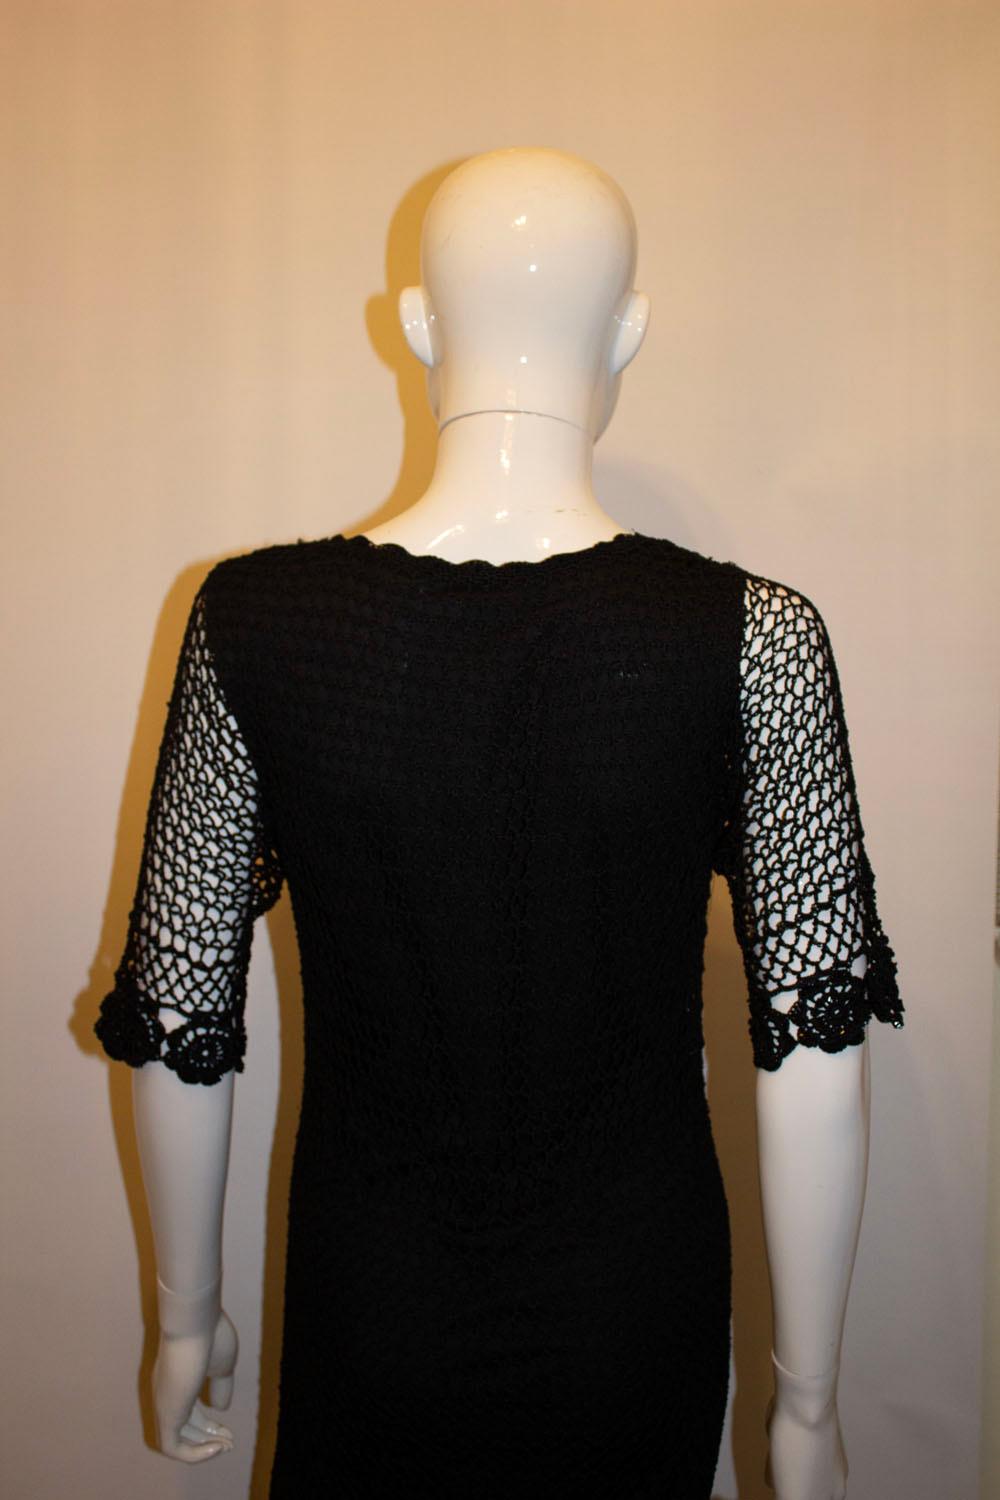 Vintage 1970s Boho Black Crochet Dress In Good Condition For Sale In London, GB